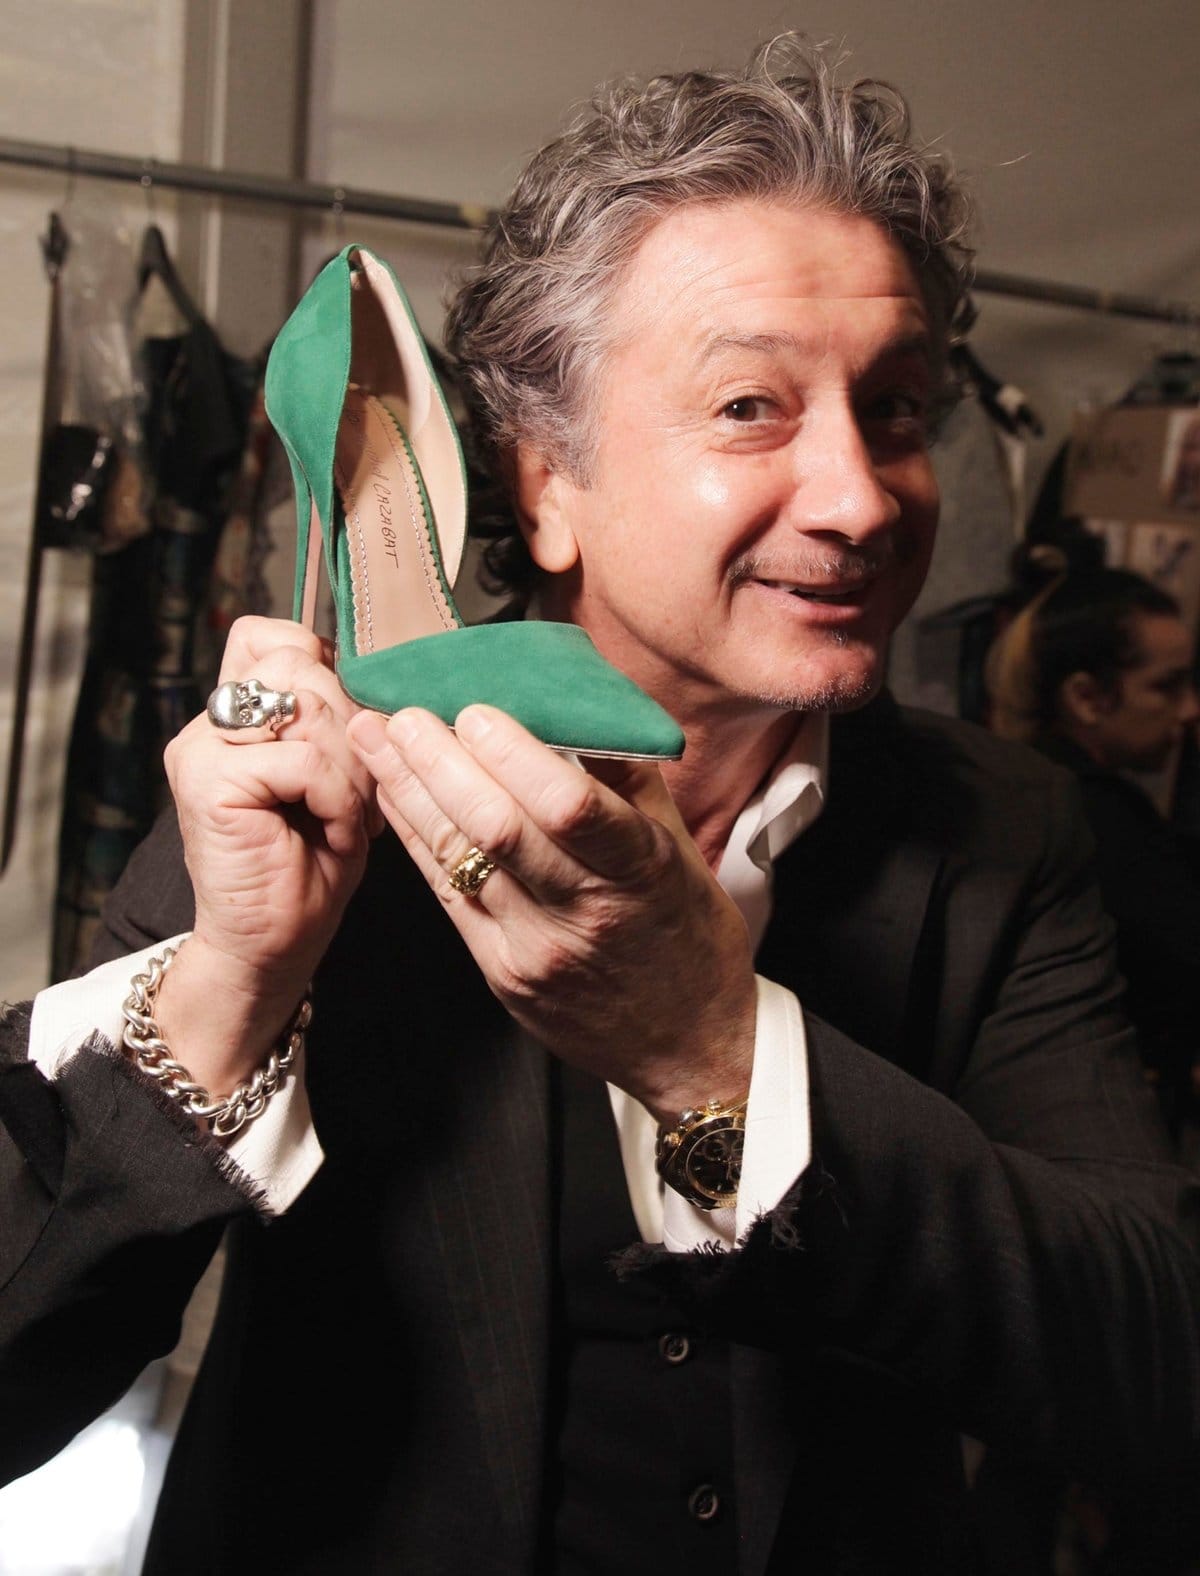 Legendary French shoe designer Jean-Michel Cazabat started his career as a buyer and store manager for fashion designer Charles Jourdan